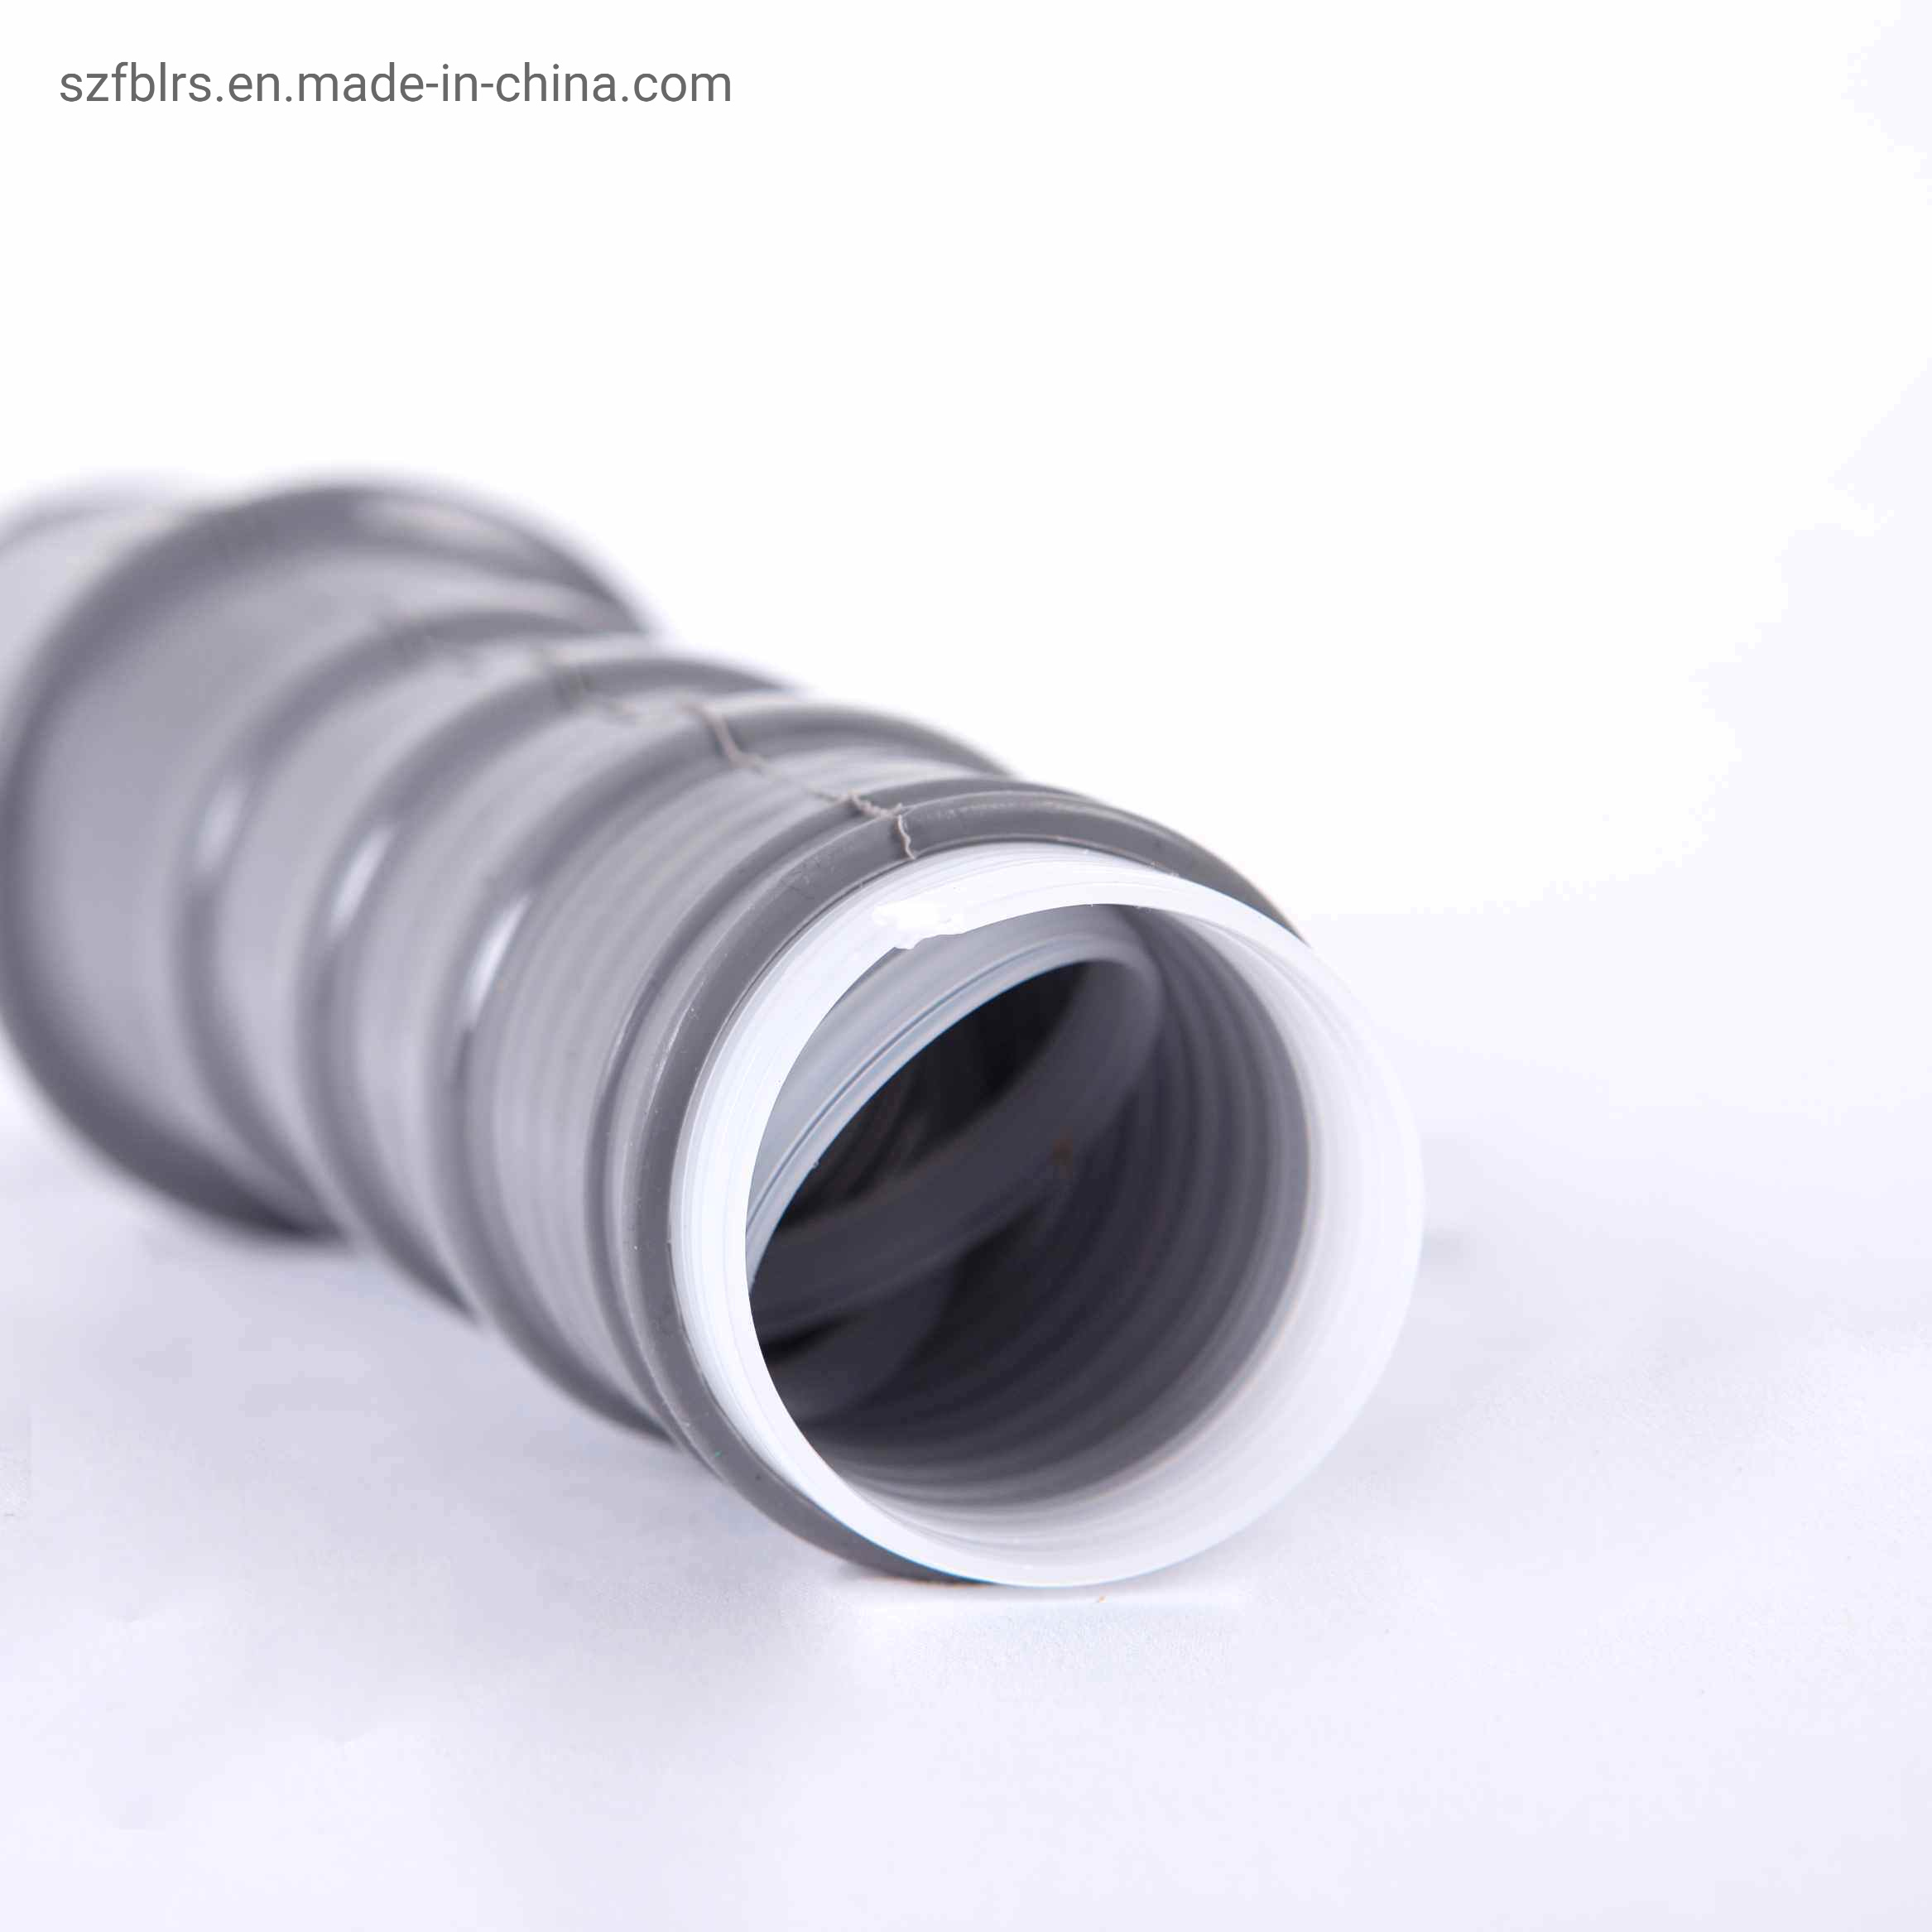 10kv High Pressure Cold Shrink Straight Pipe Extended Casing Insulation Pipe